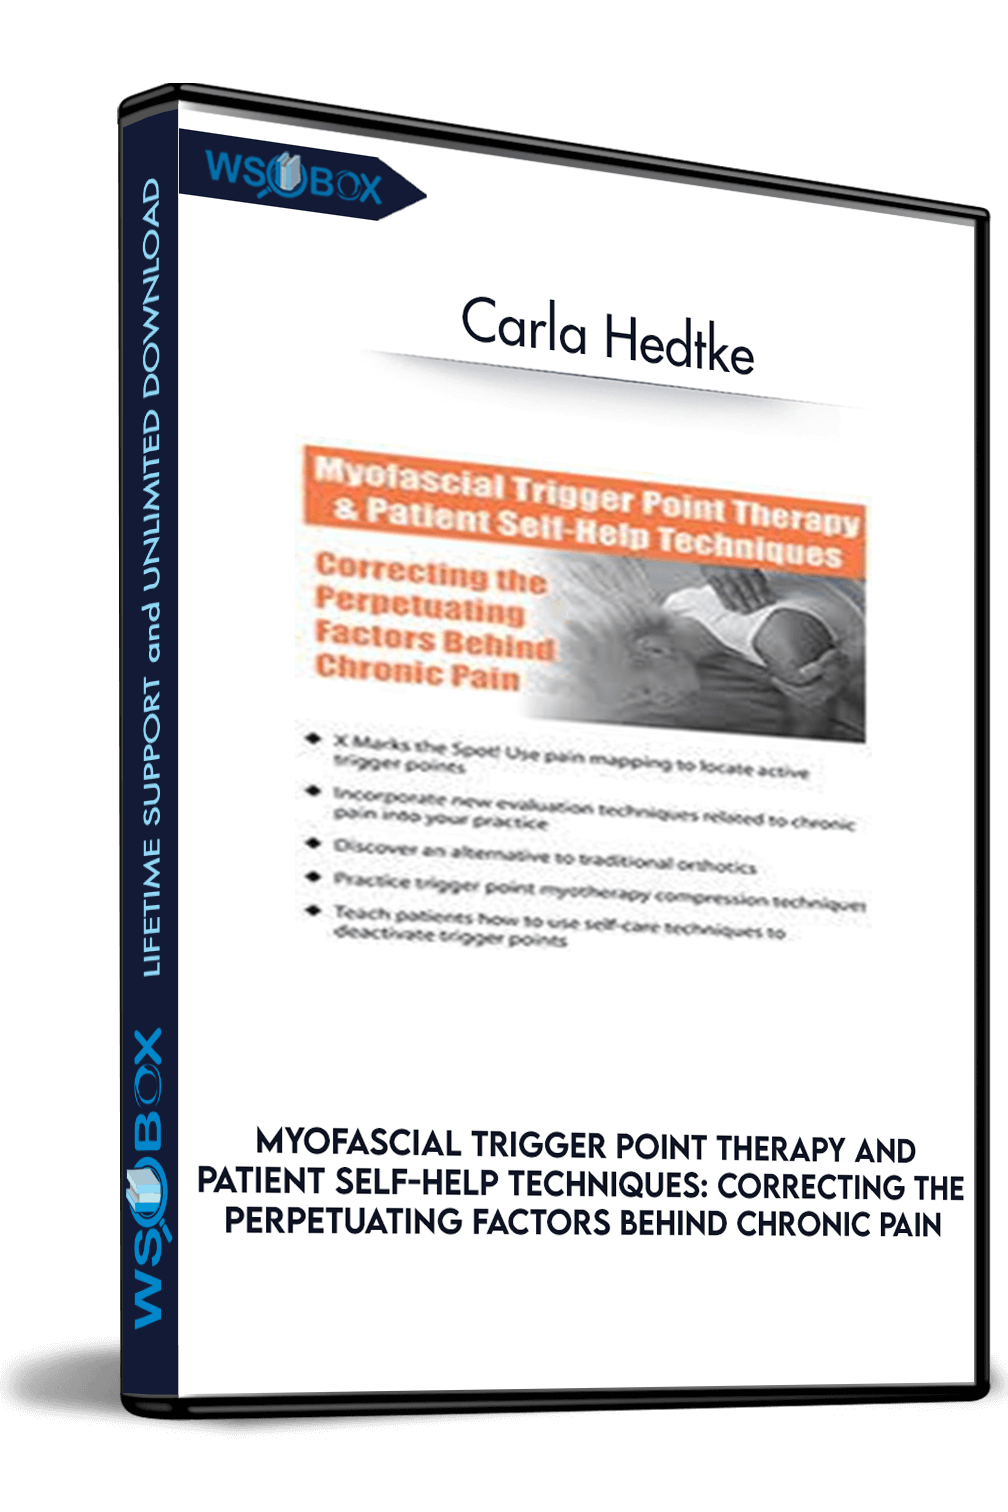 Myofascial Trigger Point Therapy and Patient Self-Help Techniques: Correcting the Perpetuating Factors Behind Chronic Pain – Carla Hedtke